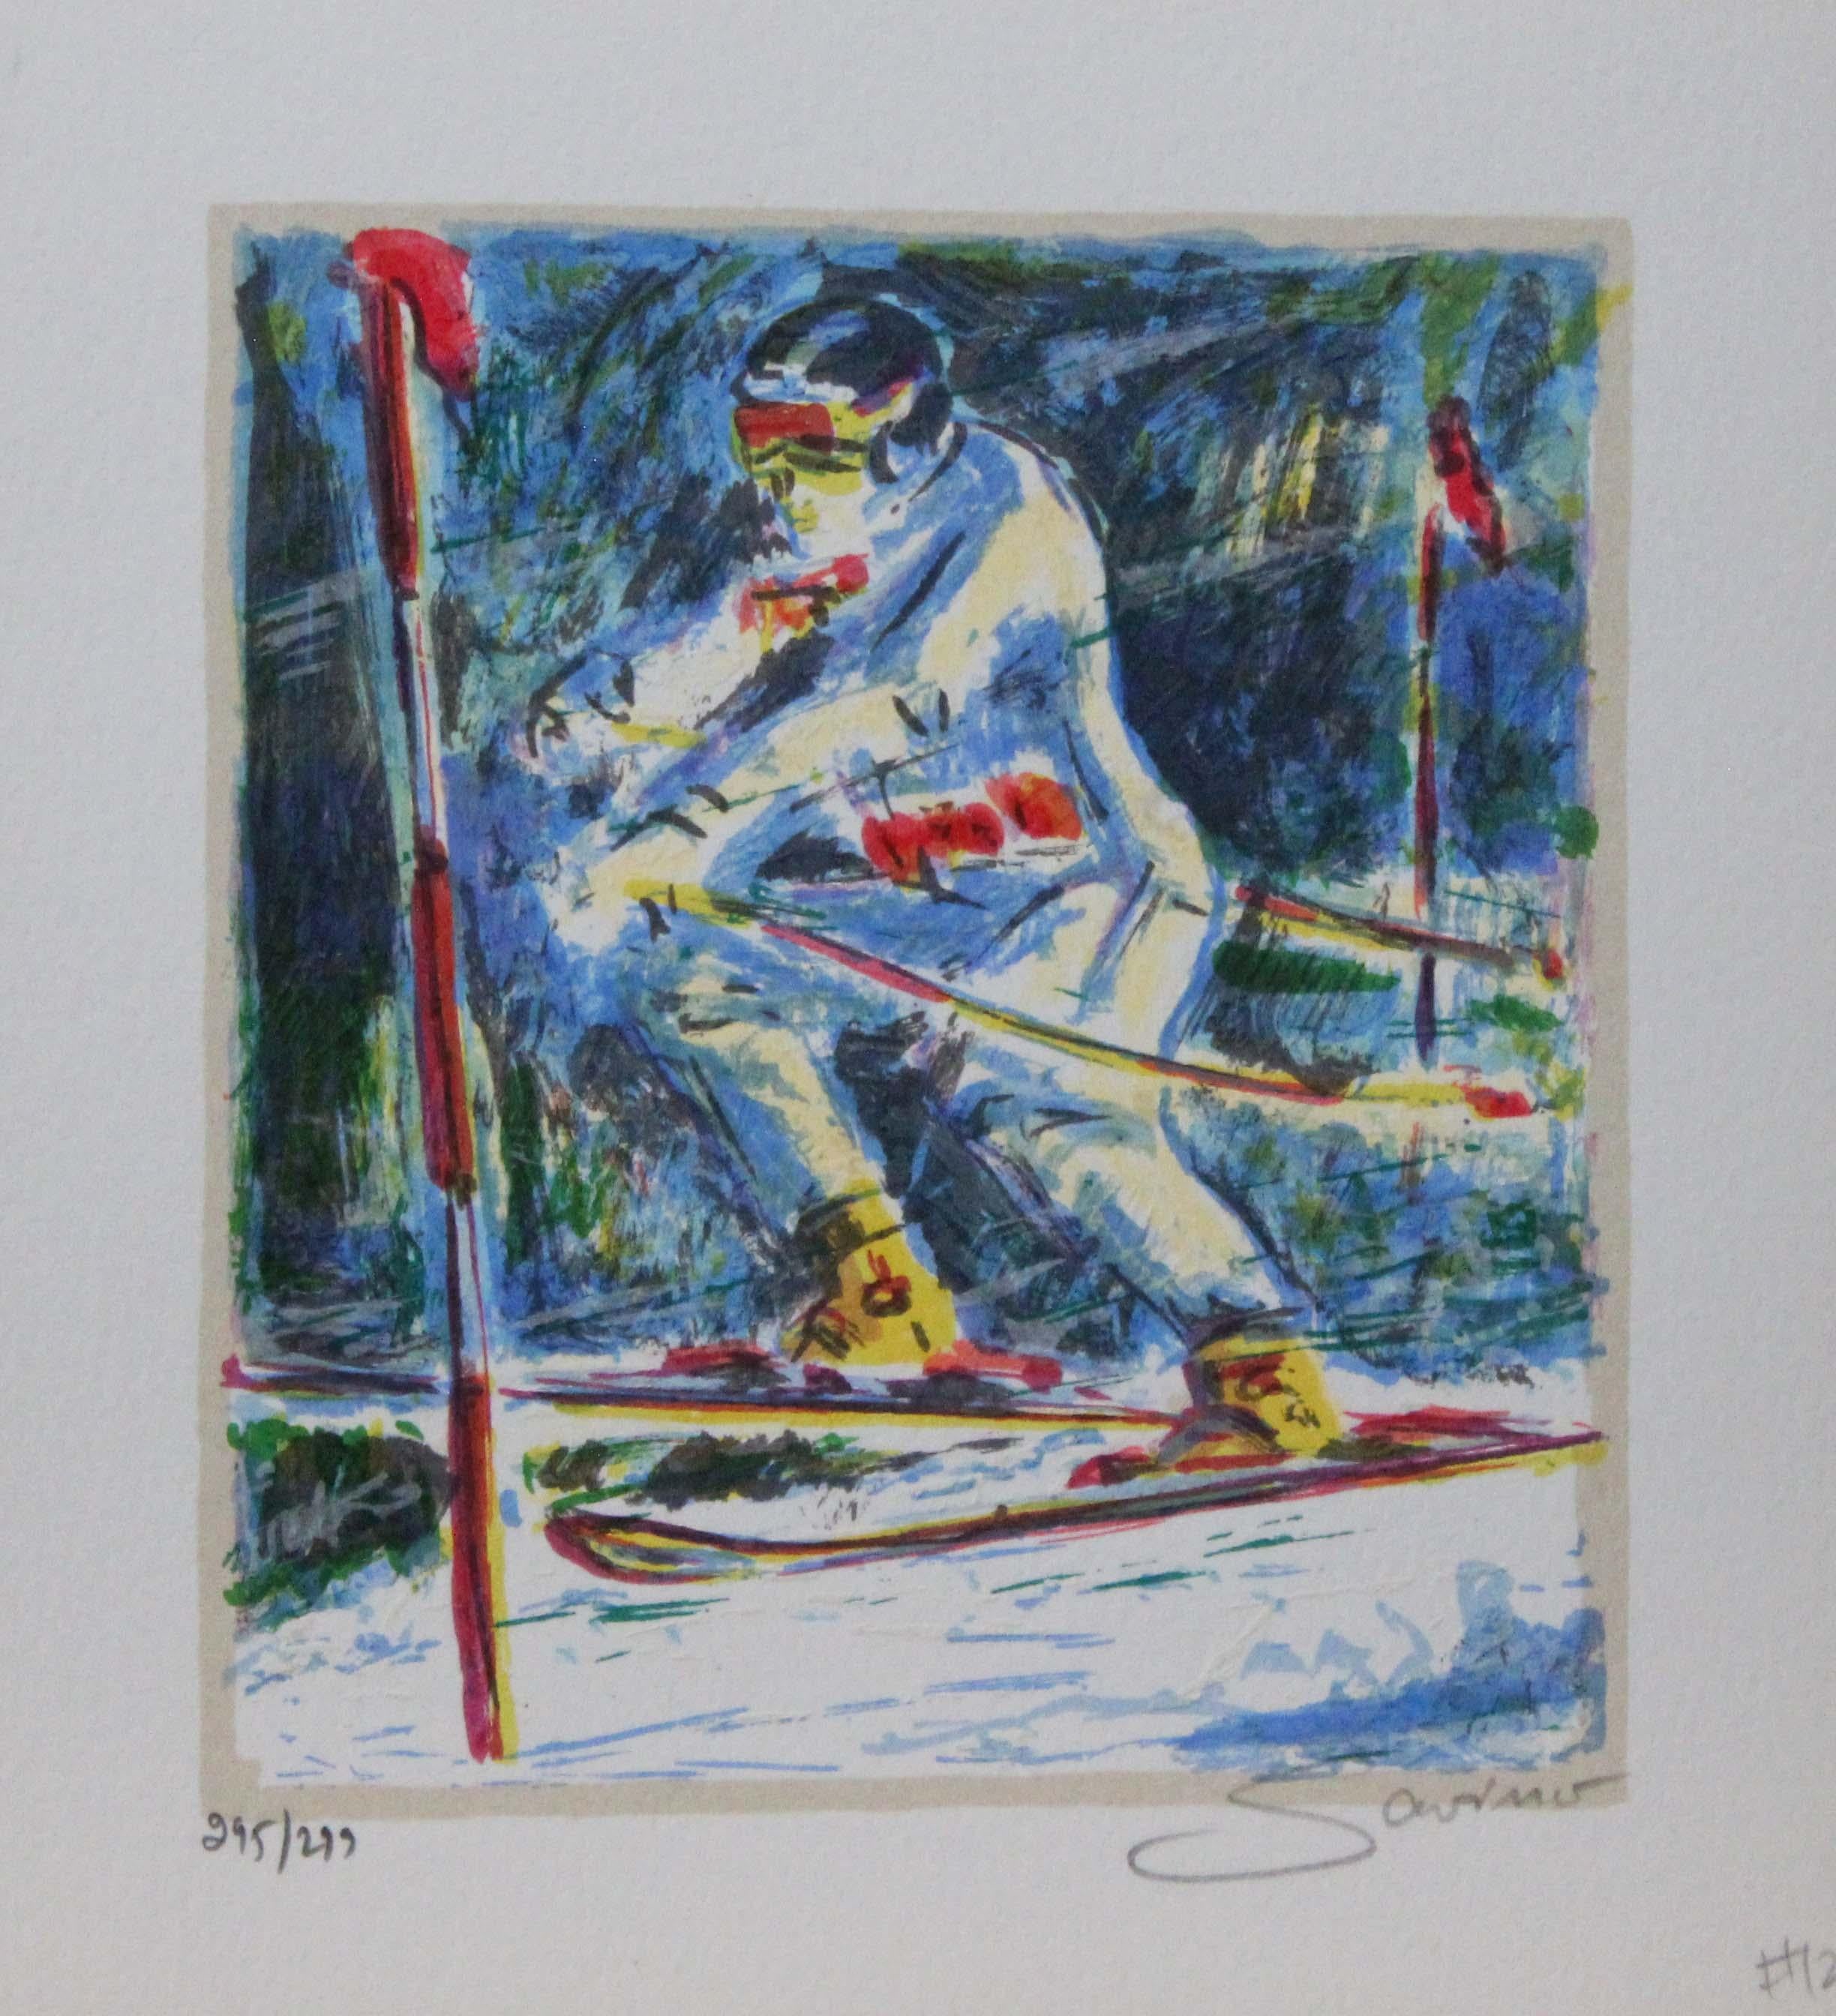 Savino Portrait Print - "Title Unknown" Sports-themed, Limited Edition Print. Pencil-signed by Artist